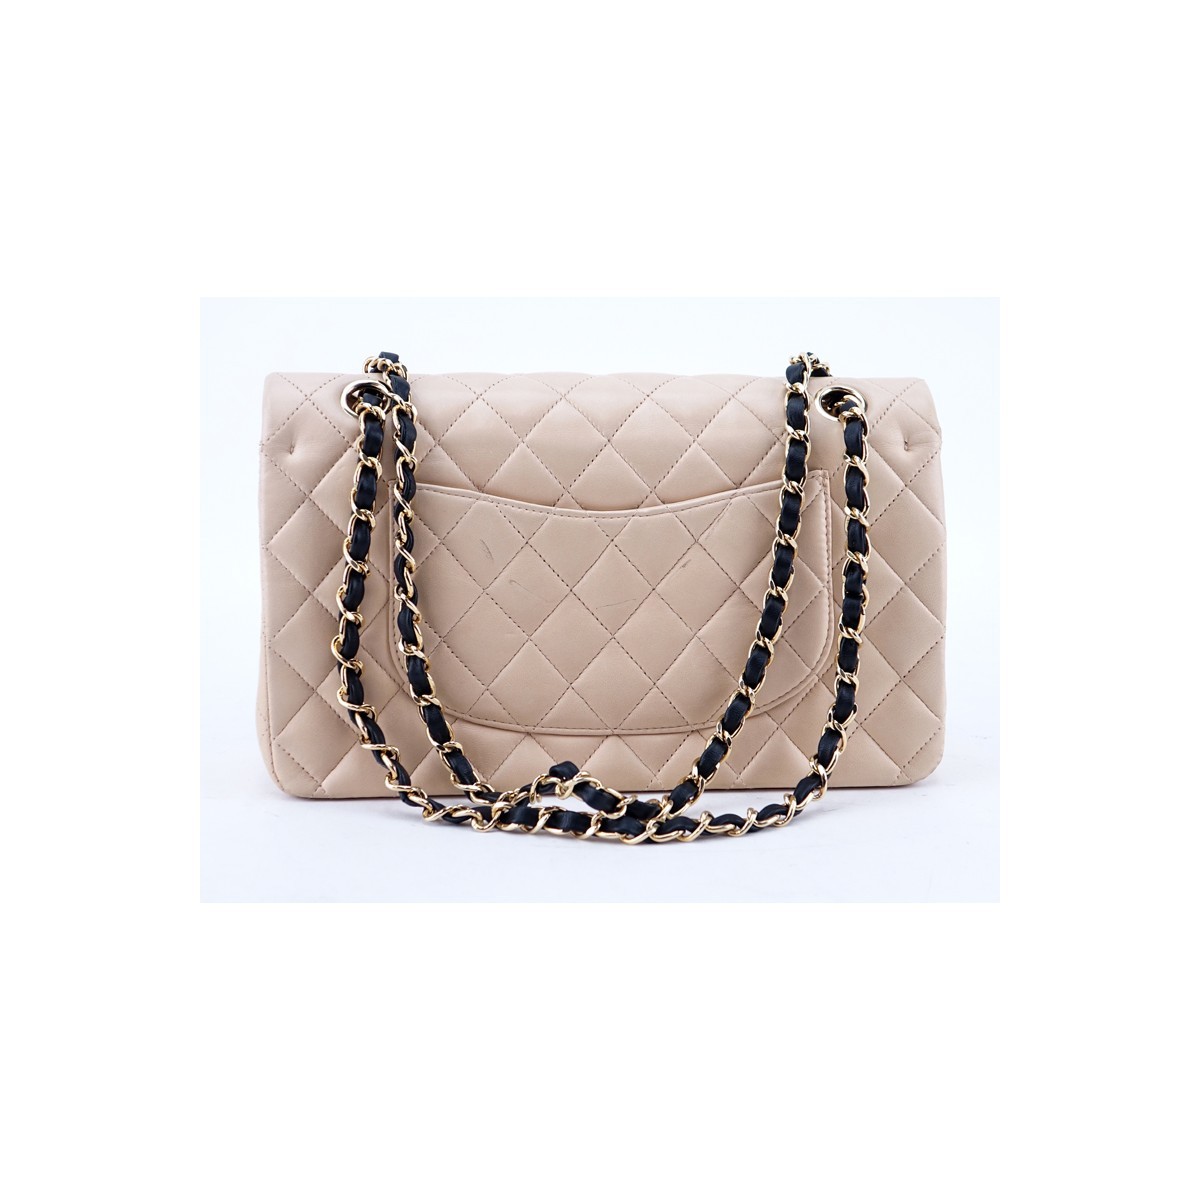 Chanel Light Beige Quilted Leather Bicolor